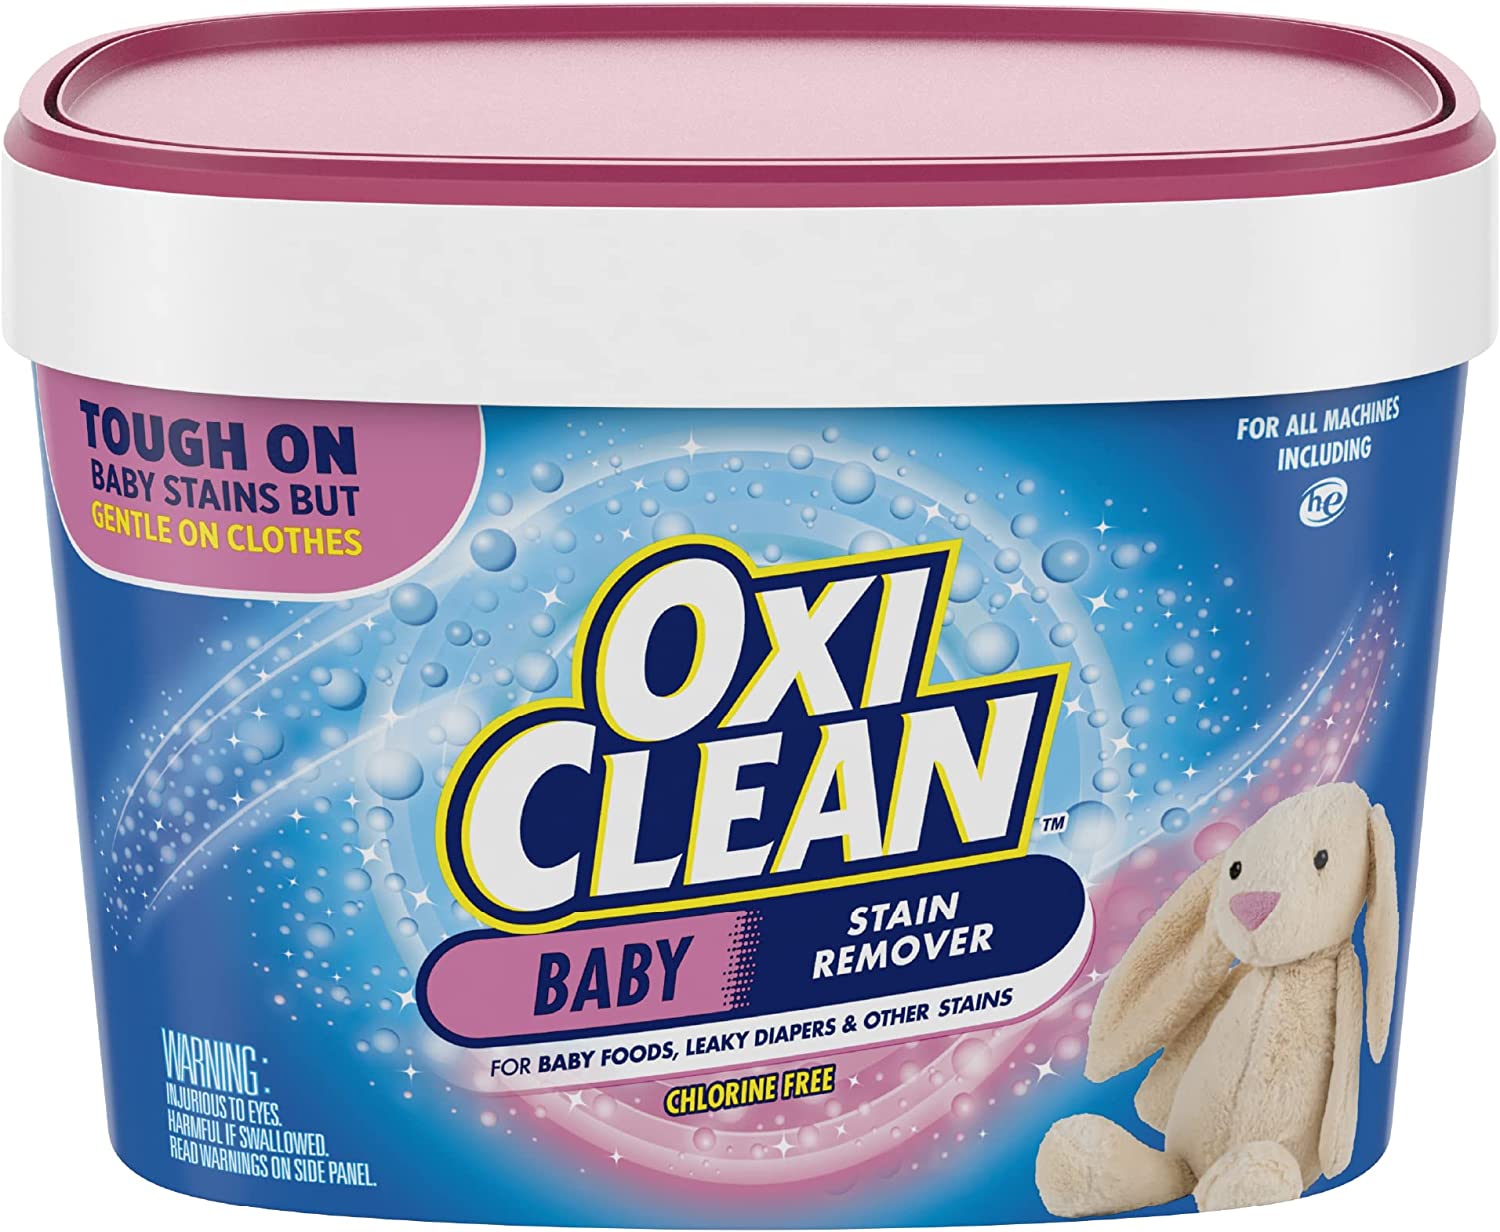 OxiClean Baby